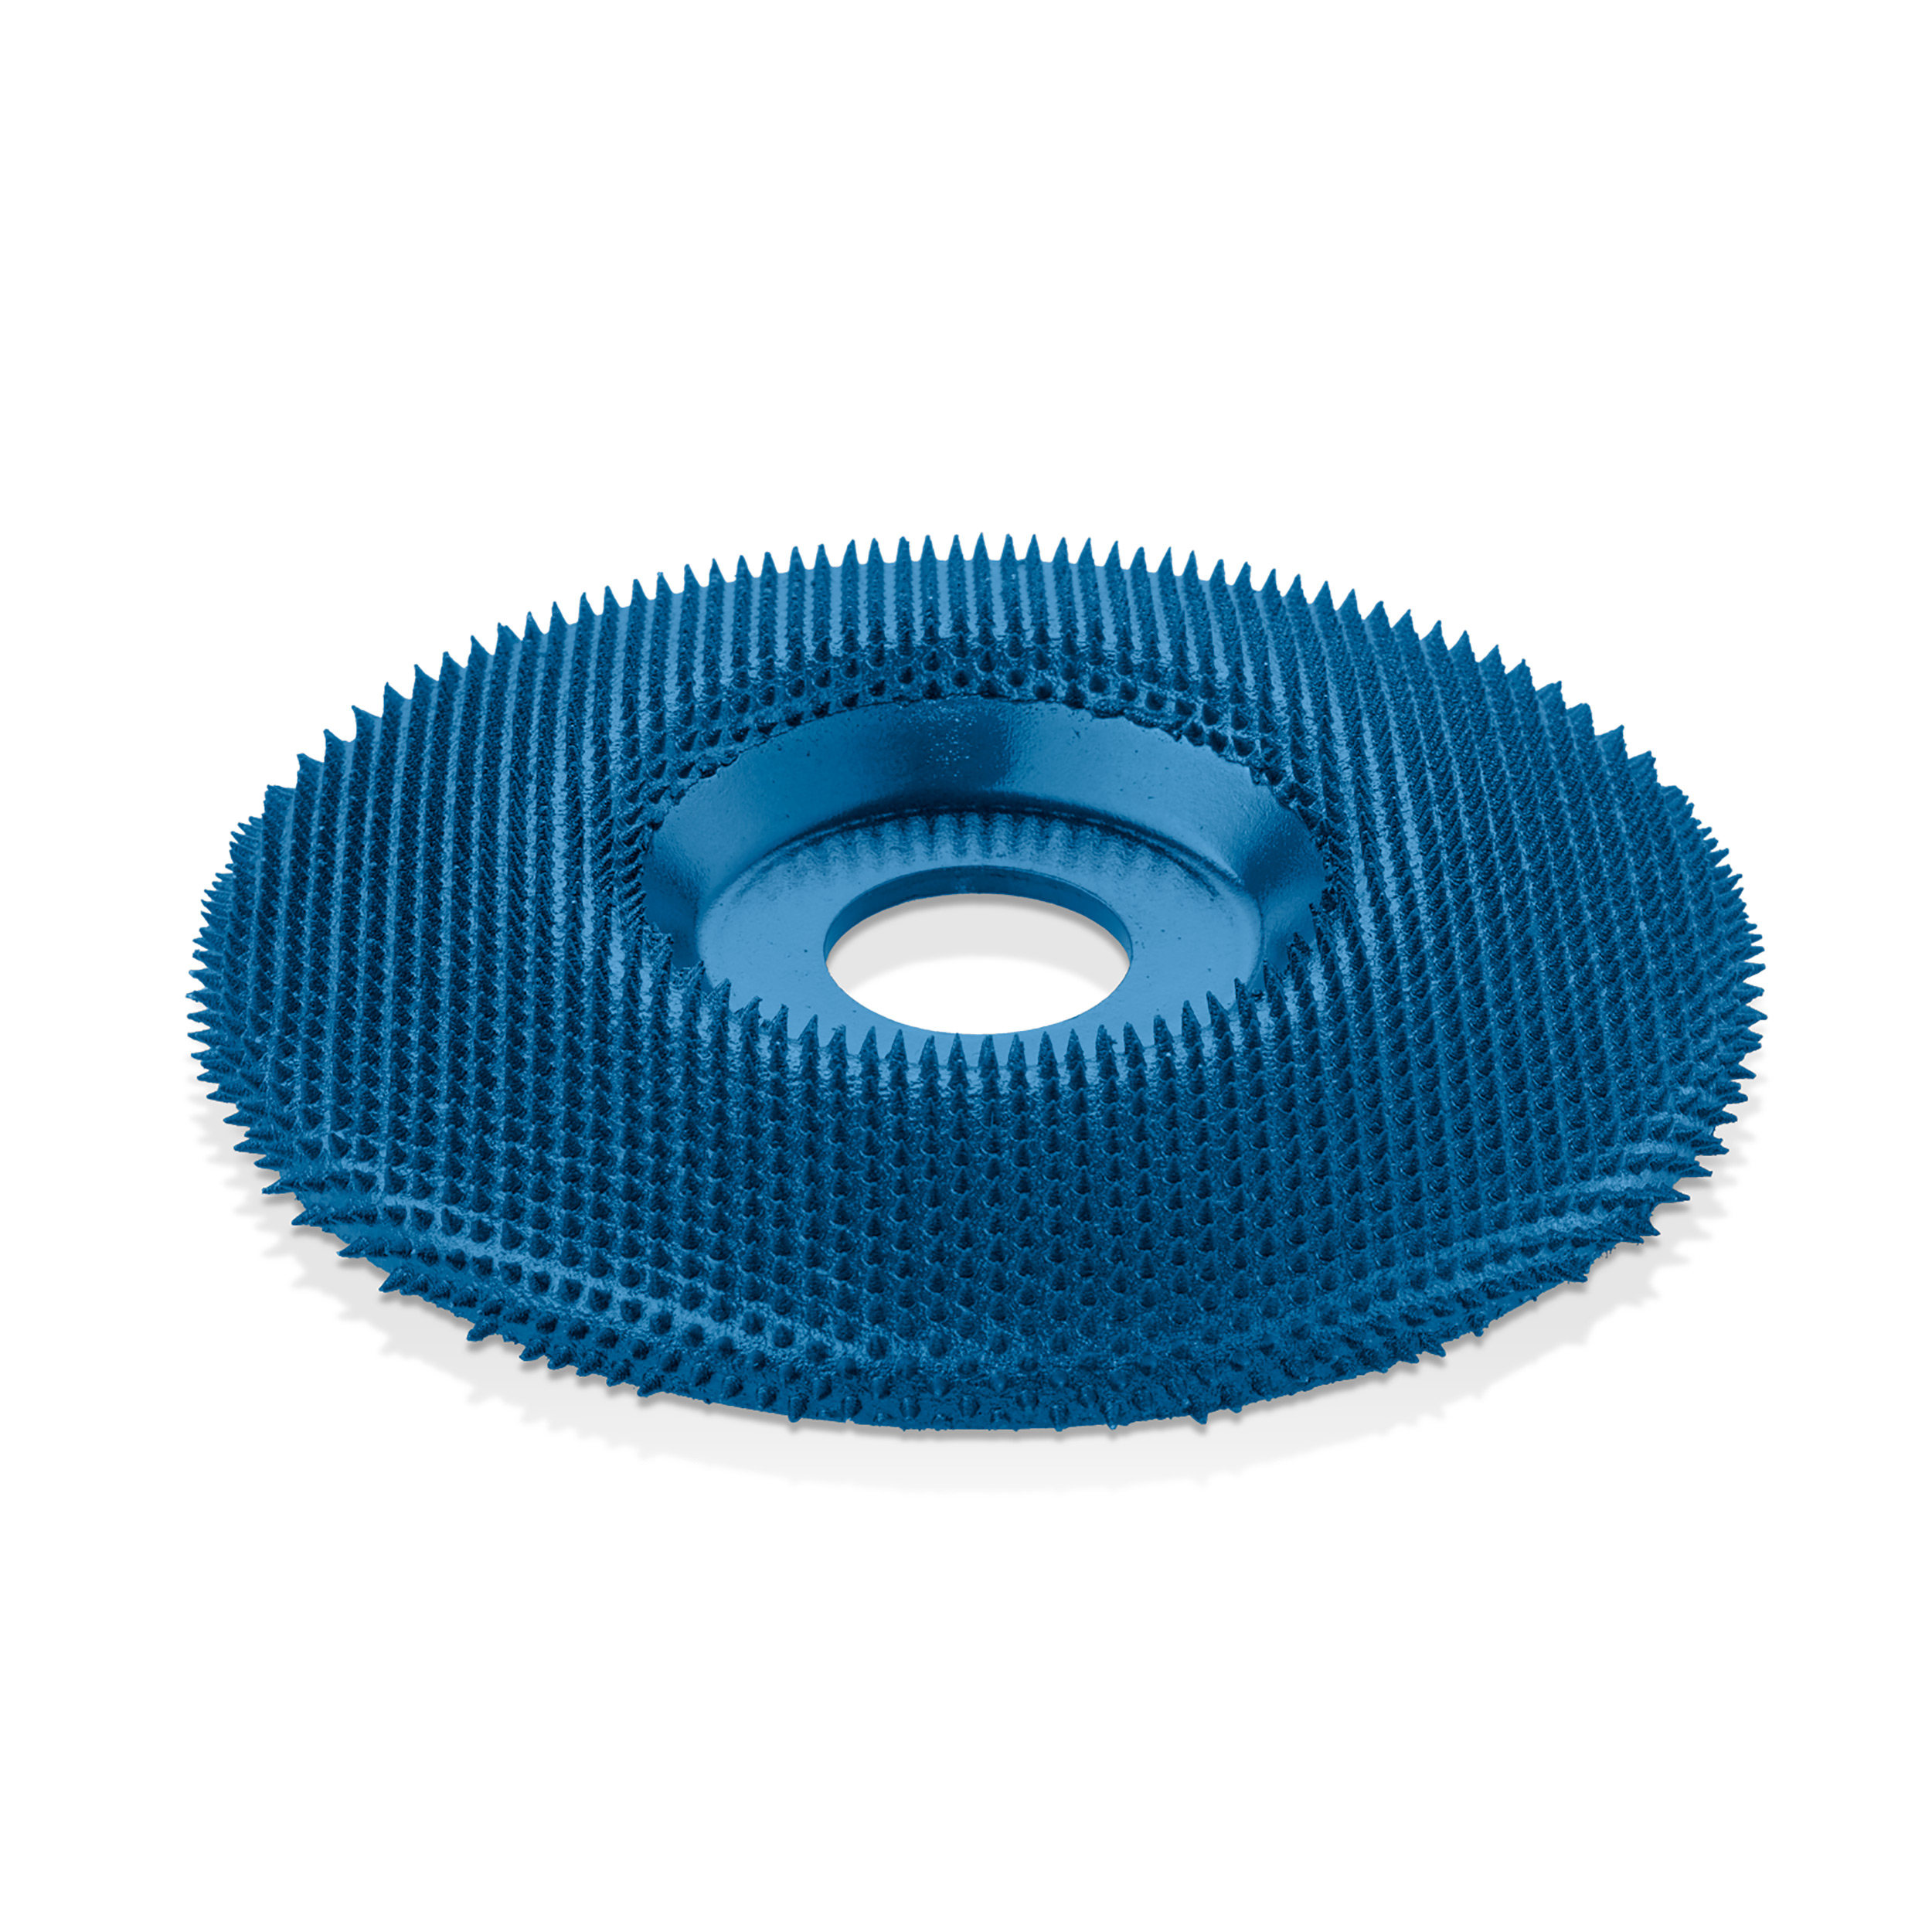 Extreme Shaping Disc, 4-1/2" Diameter, Coarse